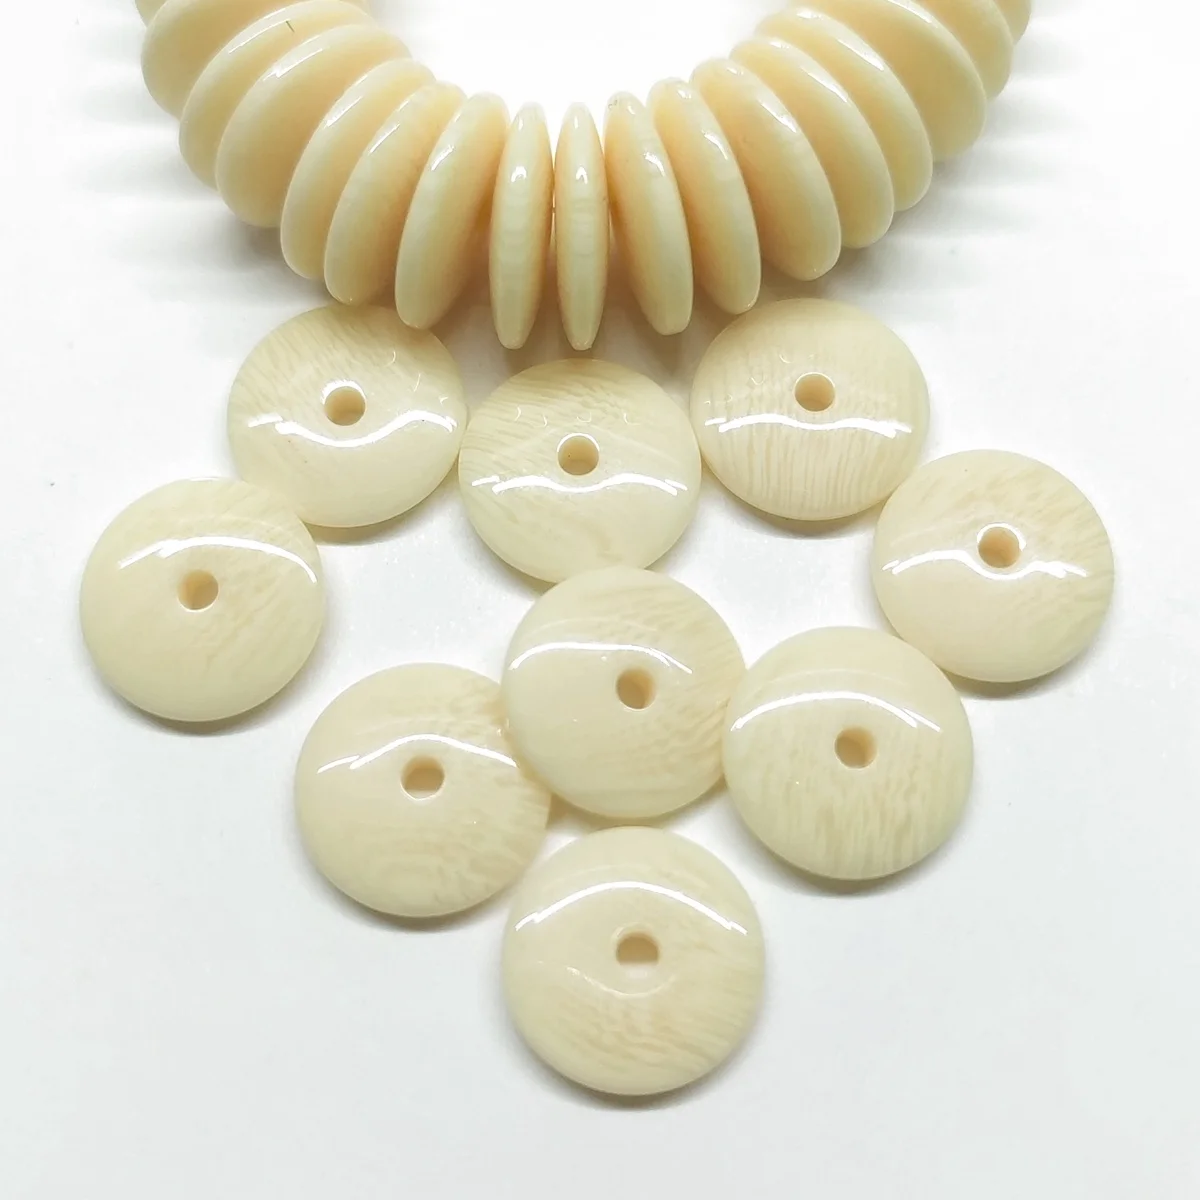 100pcs Beige Flat Round Resin Resin Imitation Ivory 6mm 8mm 10mm 12mm Loose Spacer Beads Wholesale lot for Jewelry Making copper flat bar plate pure 99 9% 1 5mm 2mm 3mm 4mm 5mm 8mm 10mm 12mm 15mm 20mm 30mm 60mm 70mm 100mm 200mm